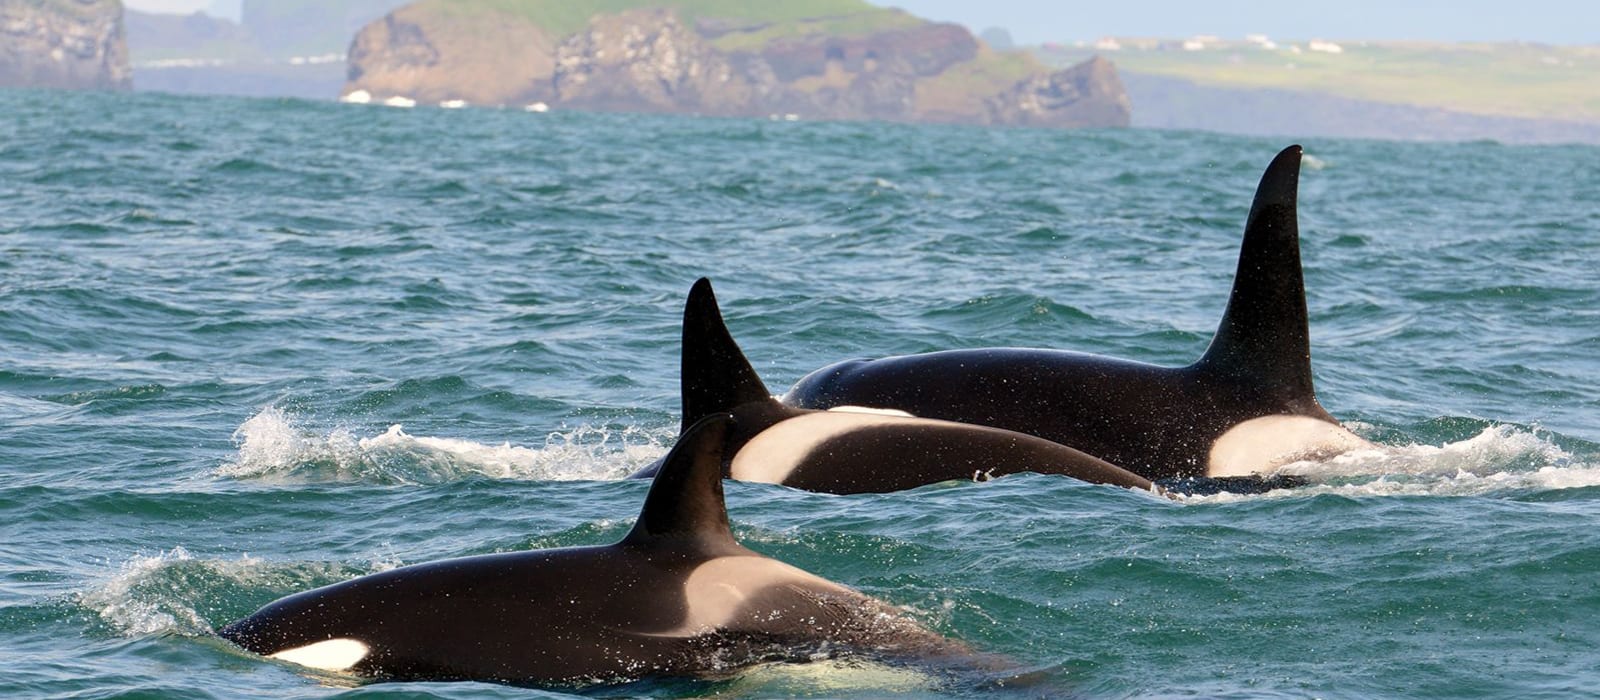 Killer Whales and their prey in Iceland